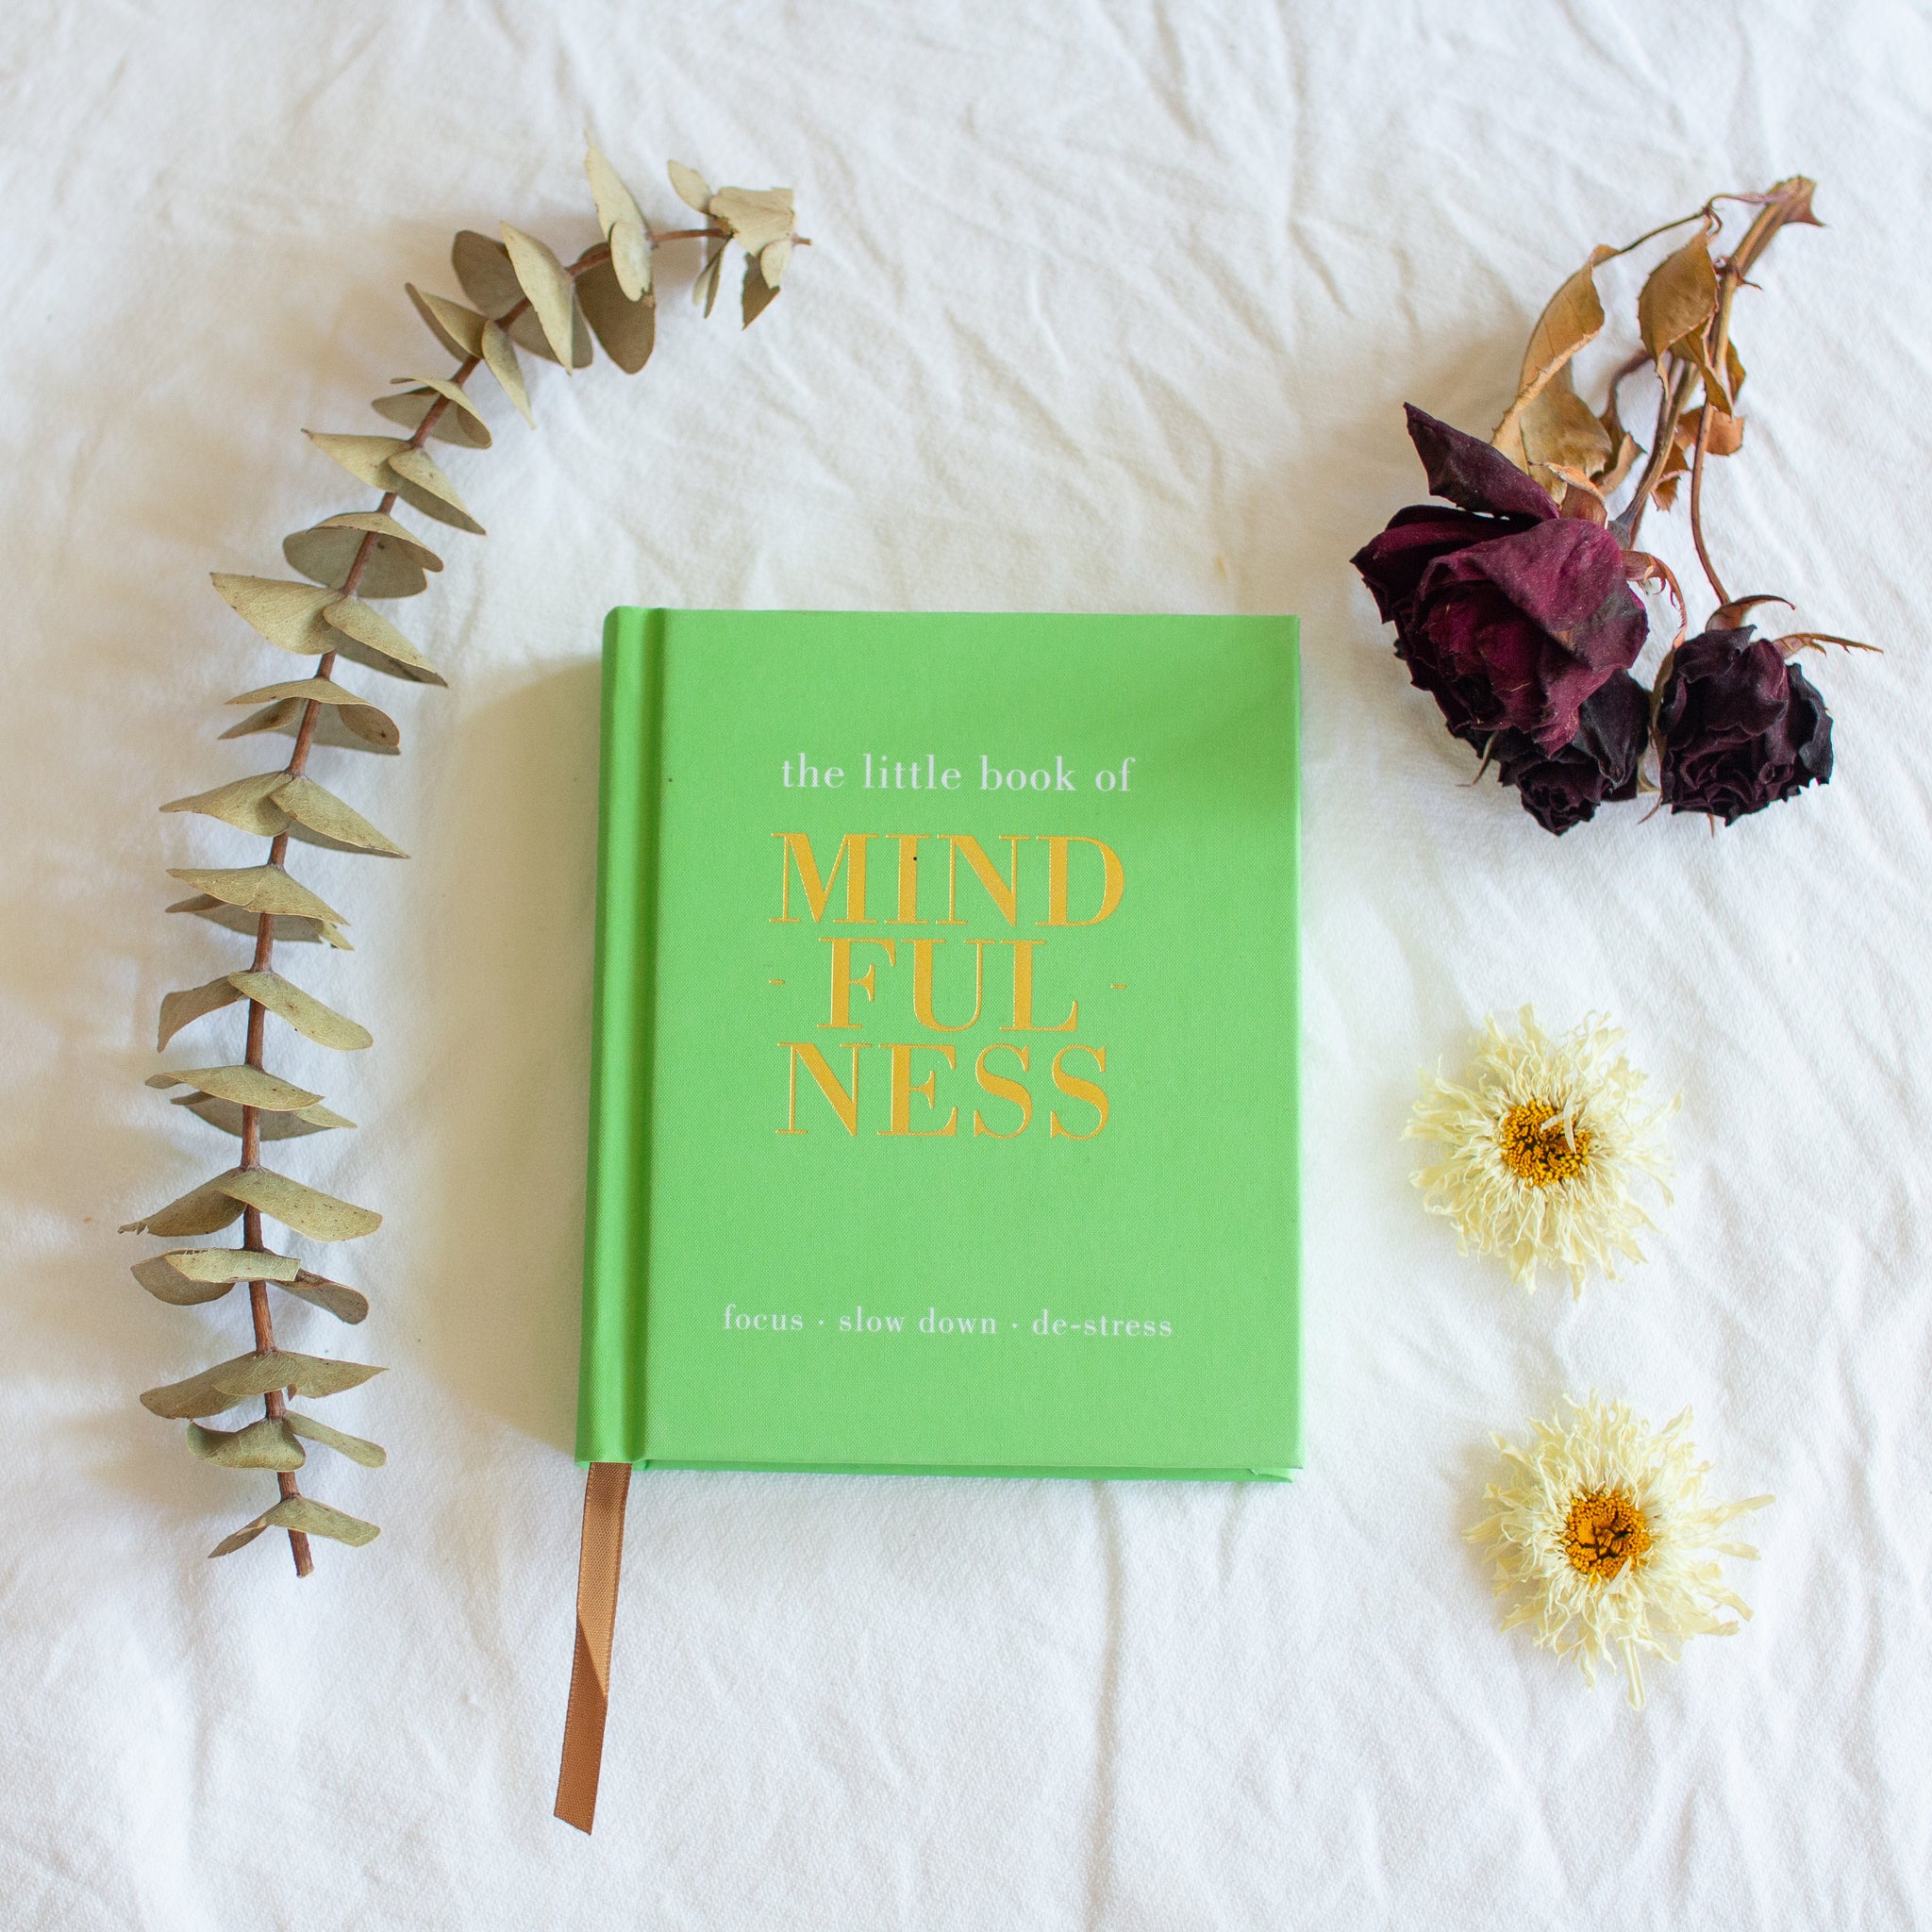 The Little Book of Mindfulness | BarryandMe